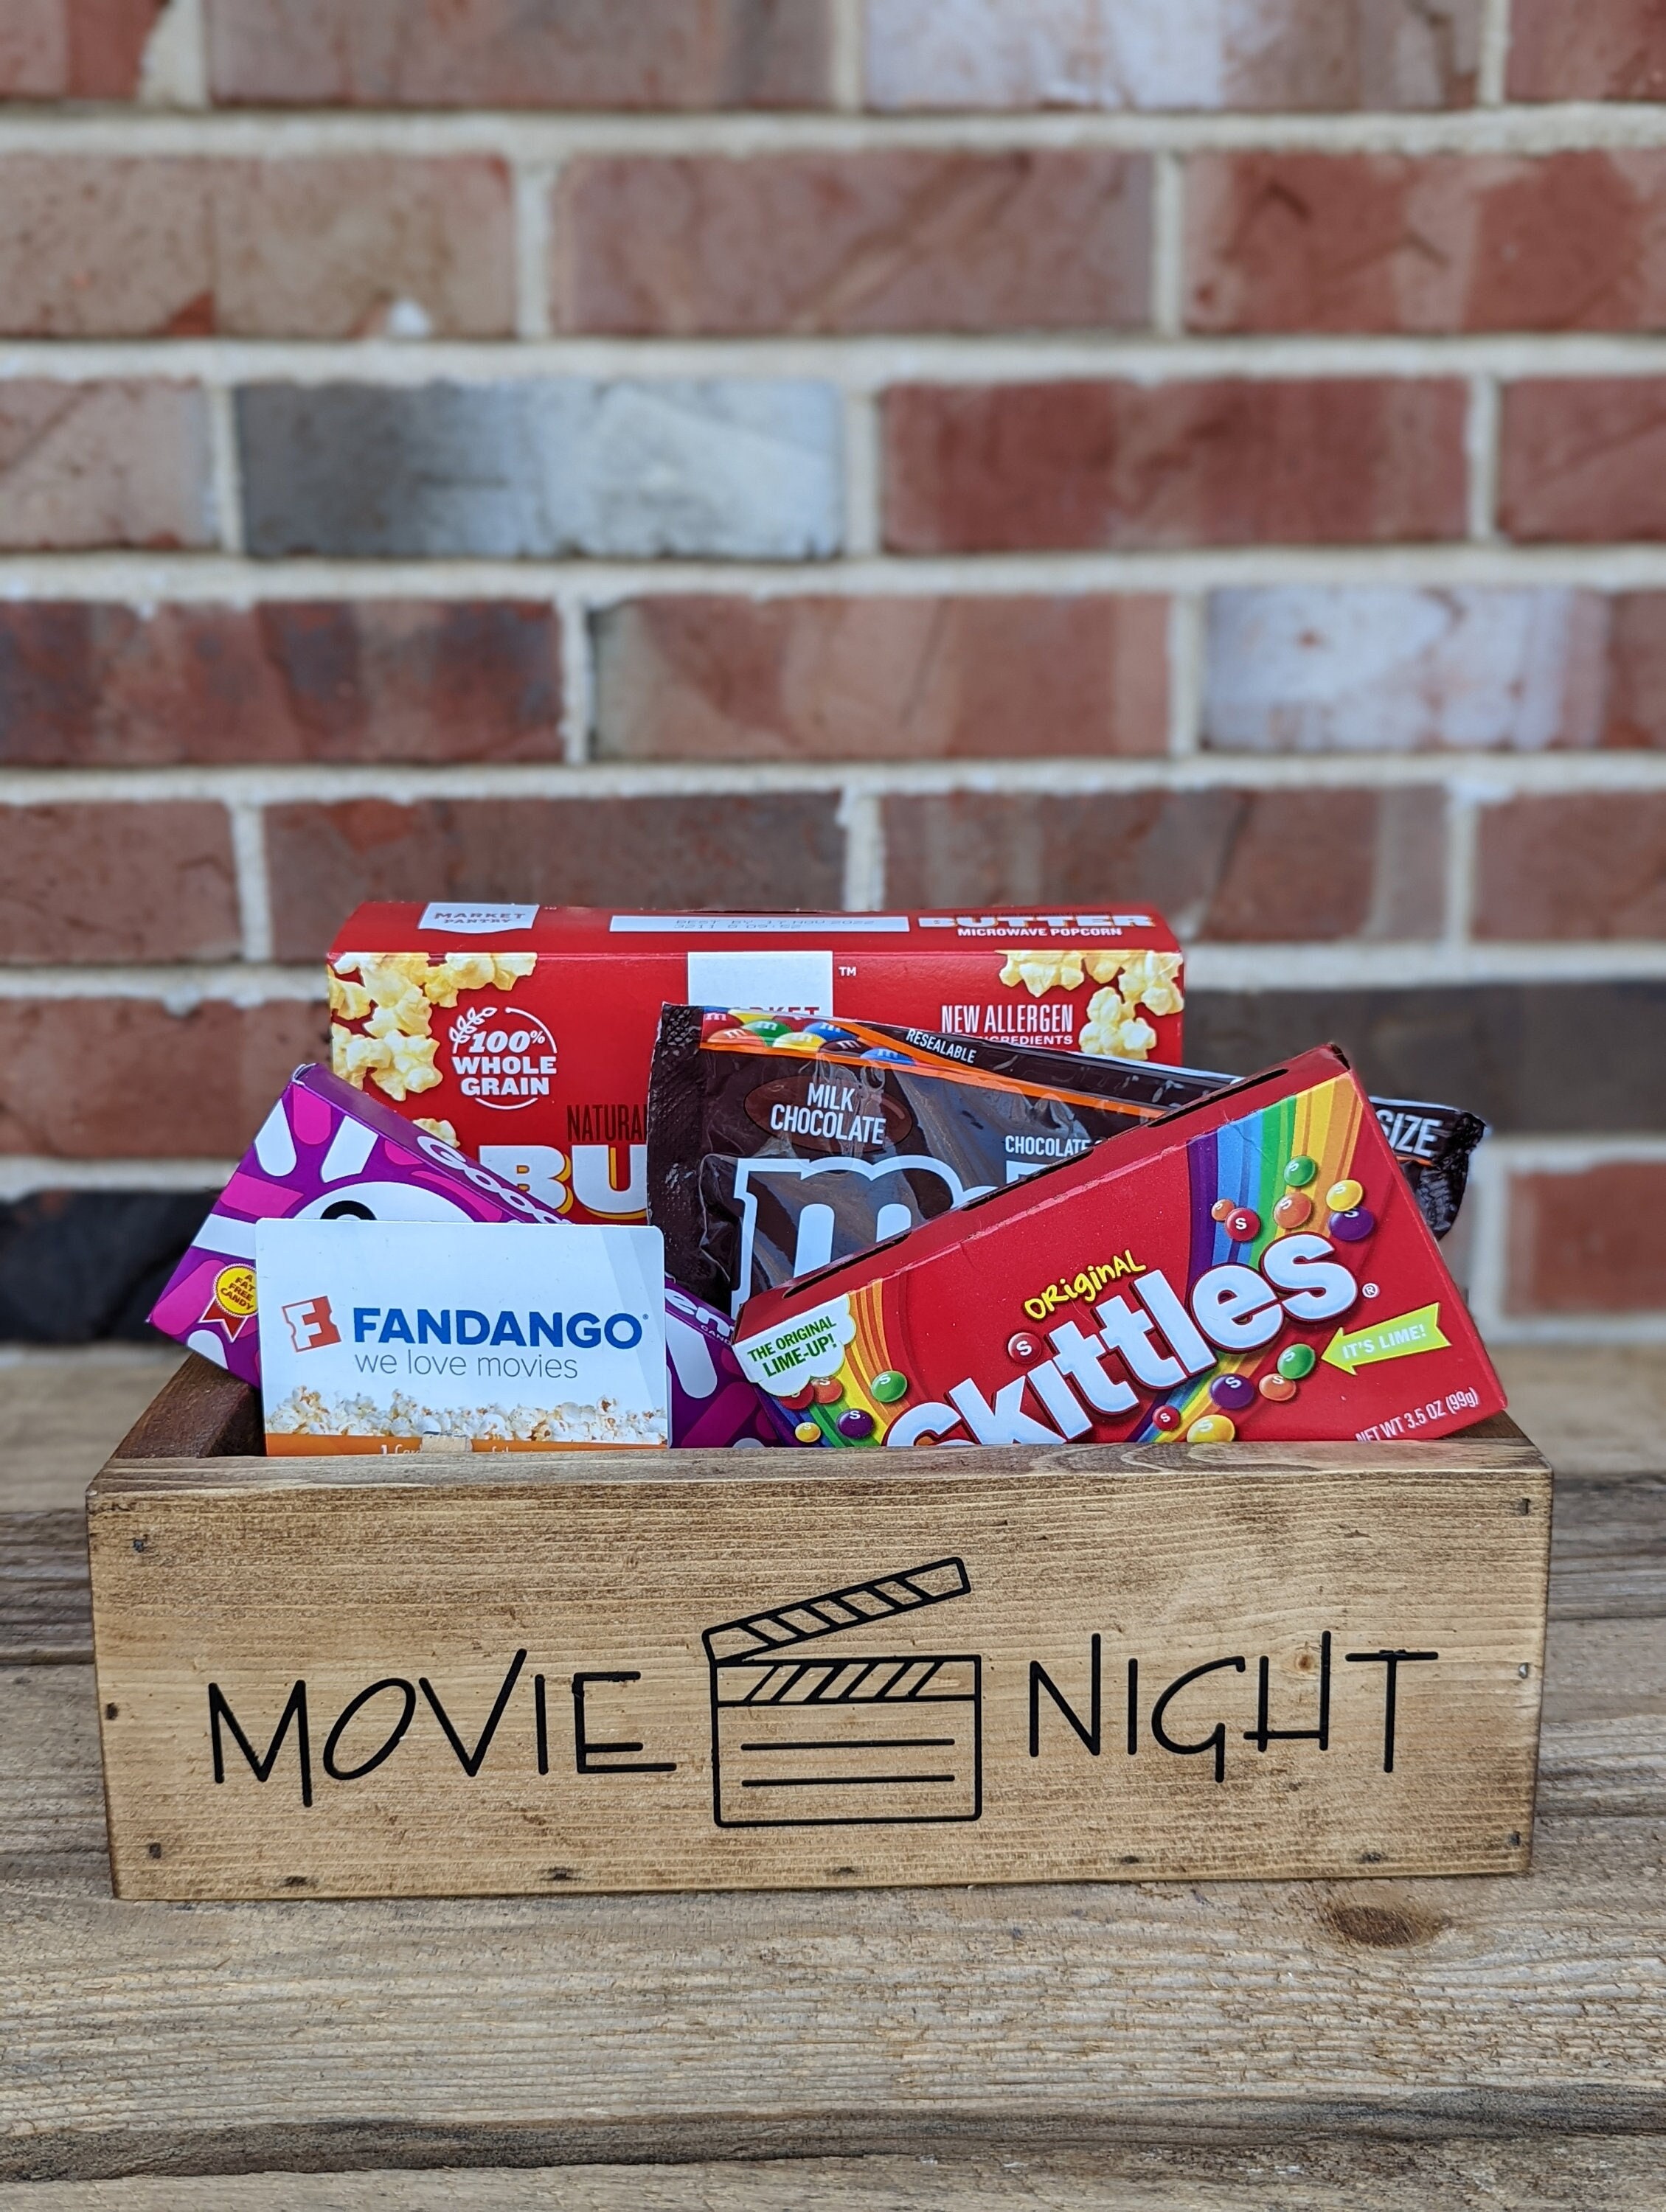 Cinema snack box for mine and the kids' trip to the movies later. : r/Frugal